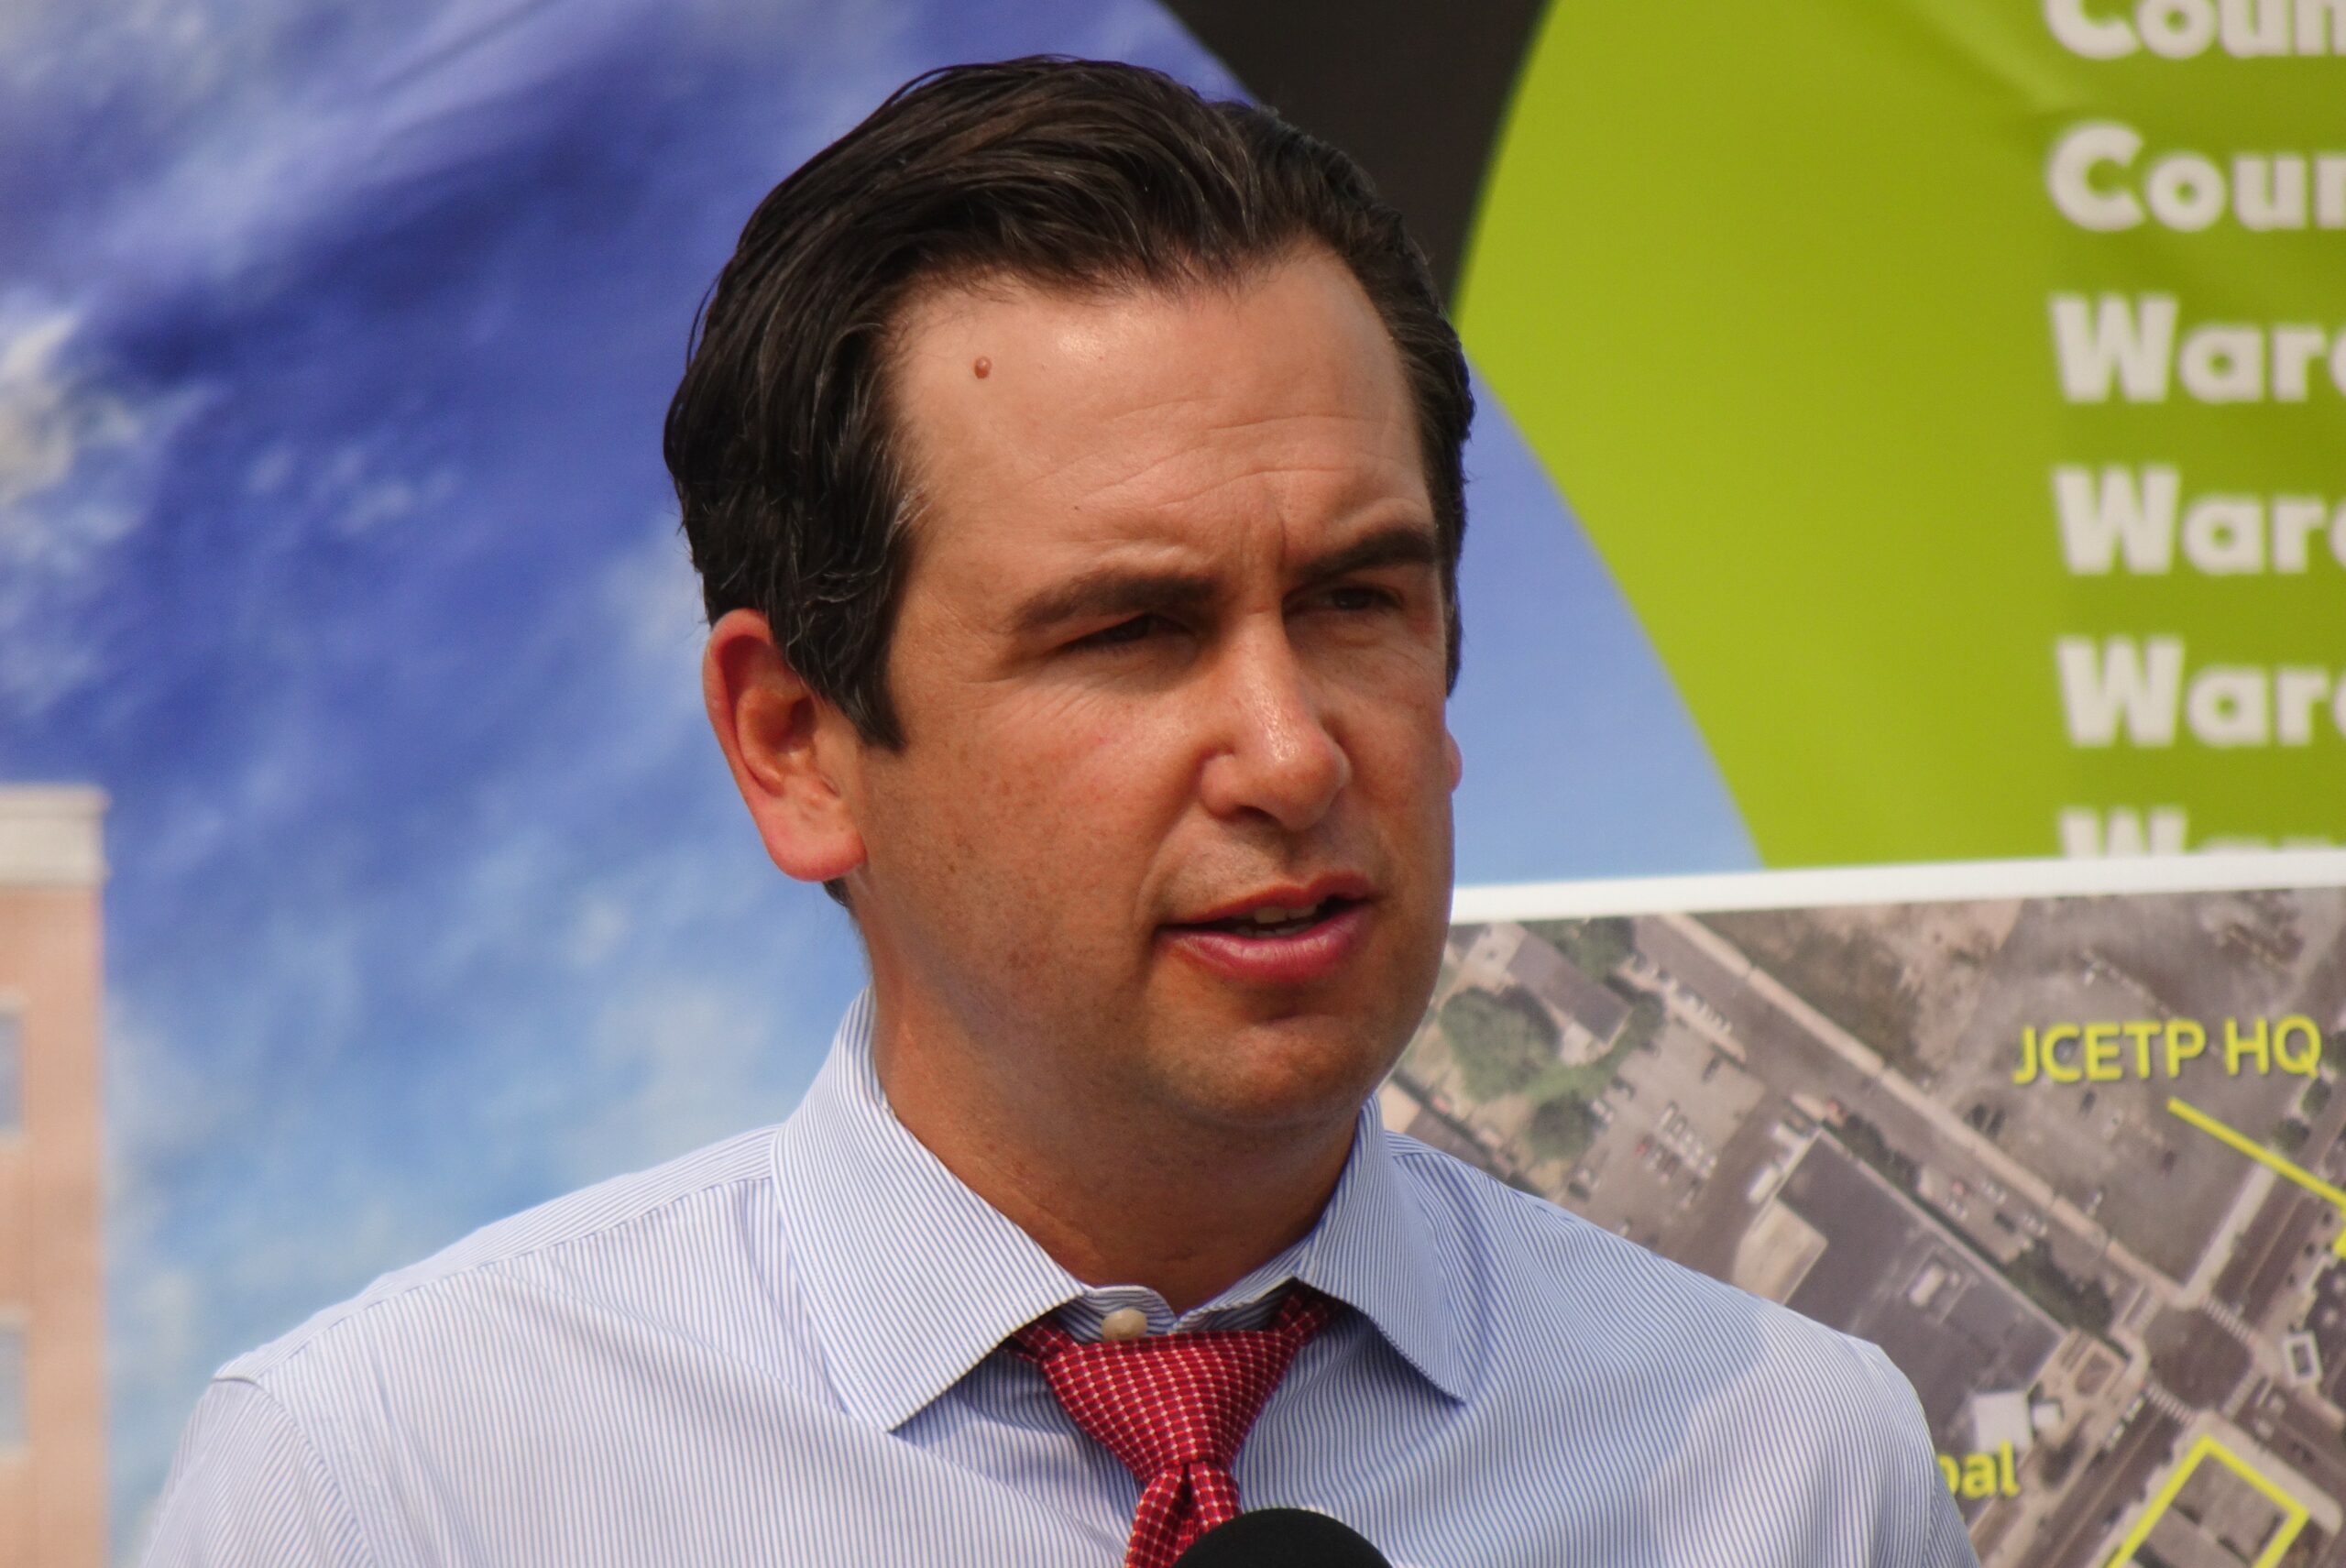 Jersey City Mayor Steven Fulop Announces Candidacy for Governor of New Jersey